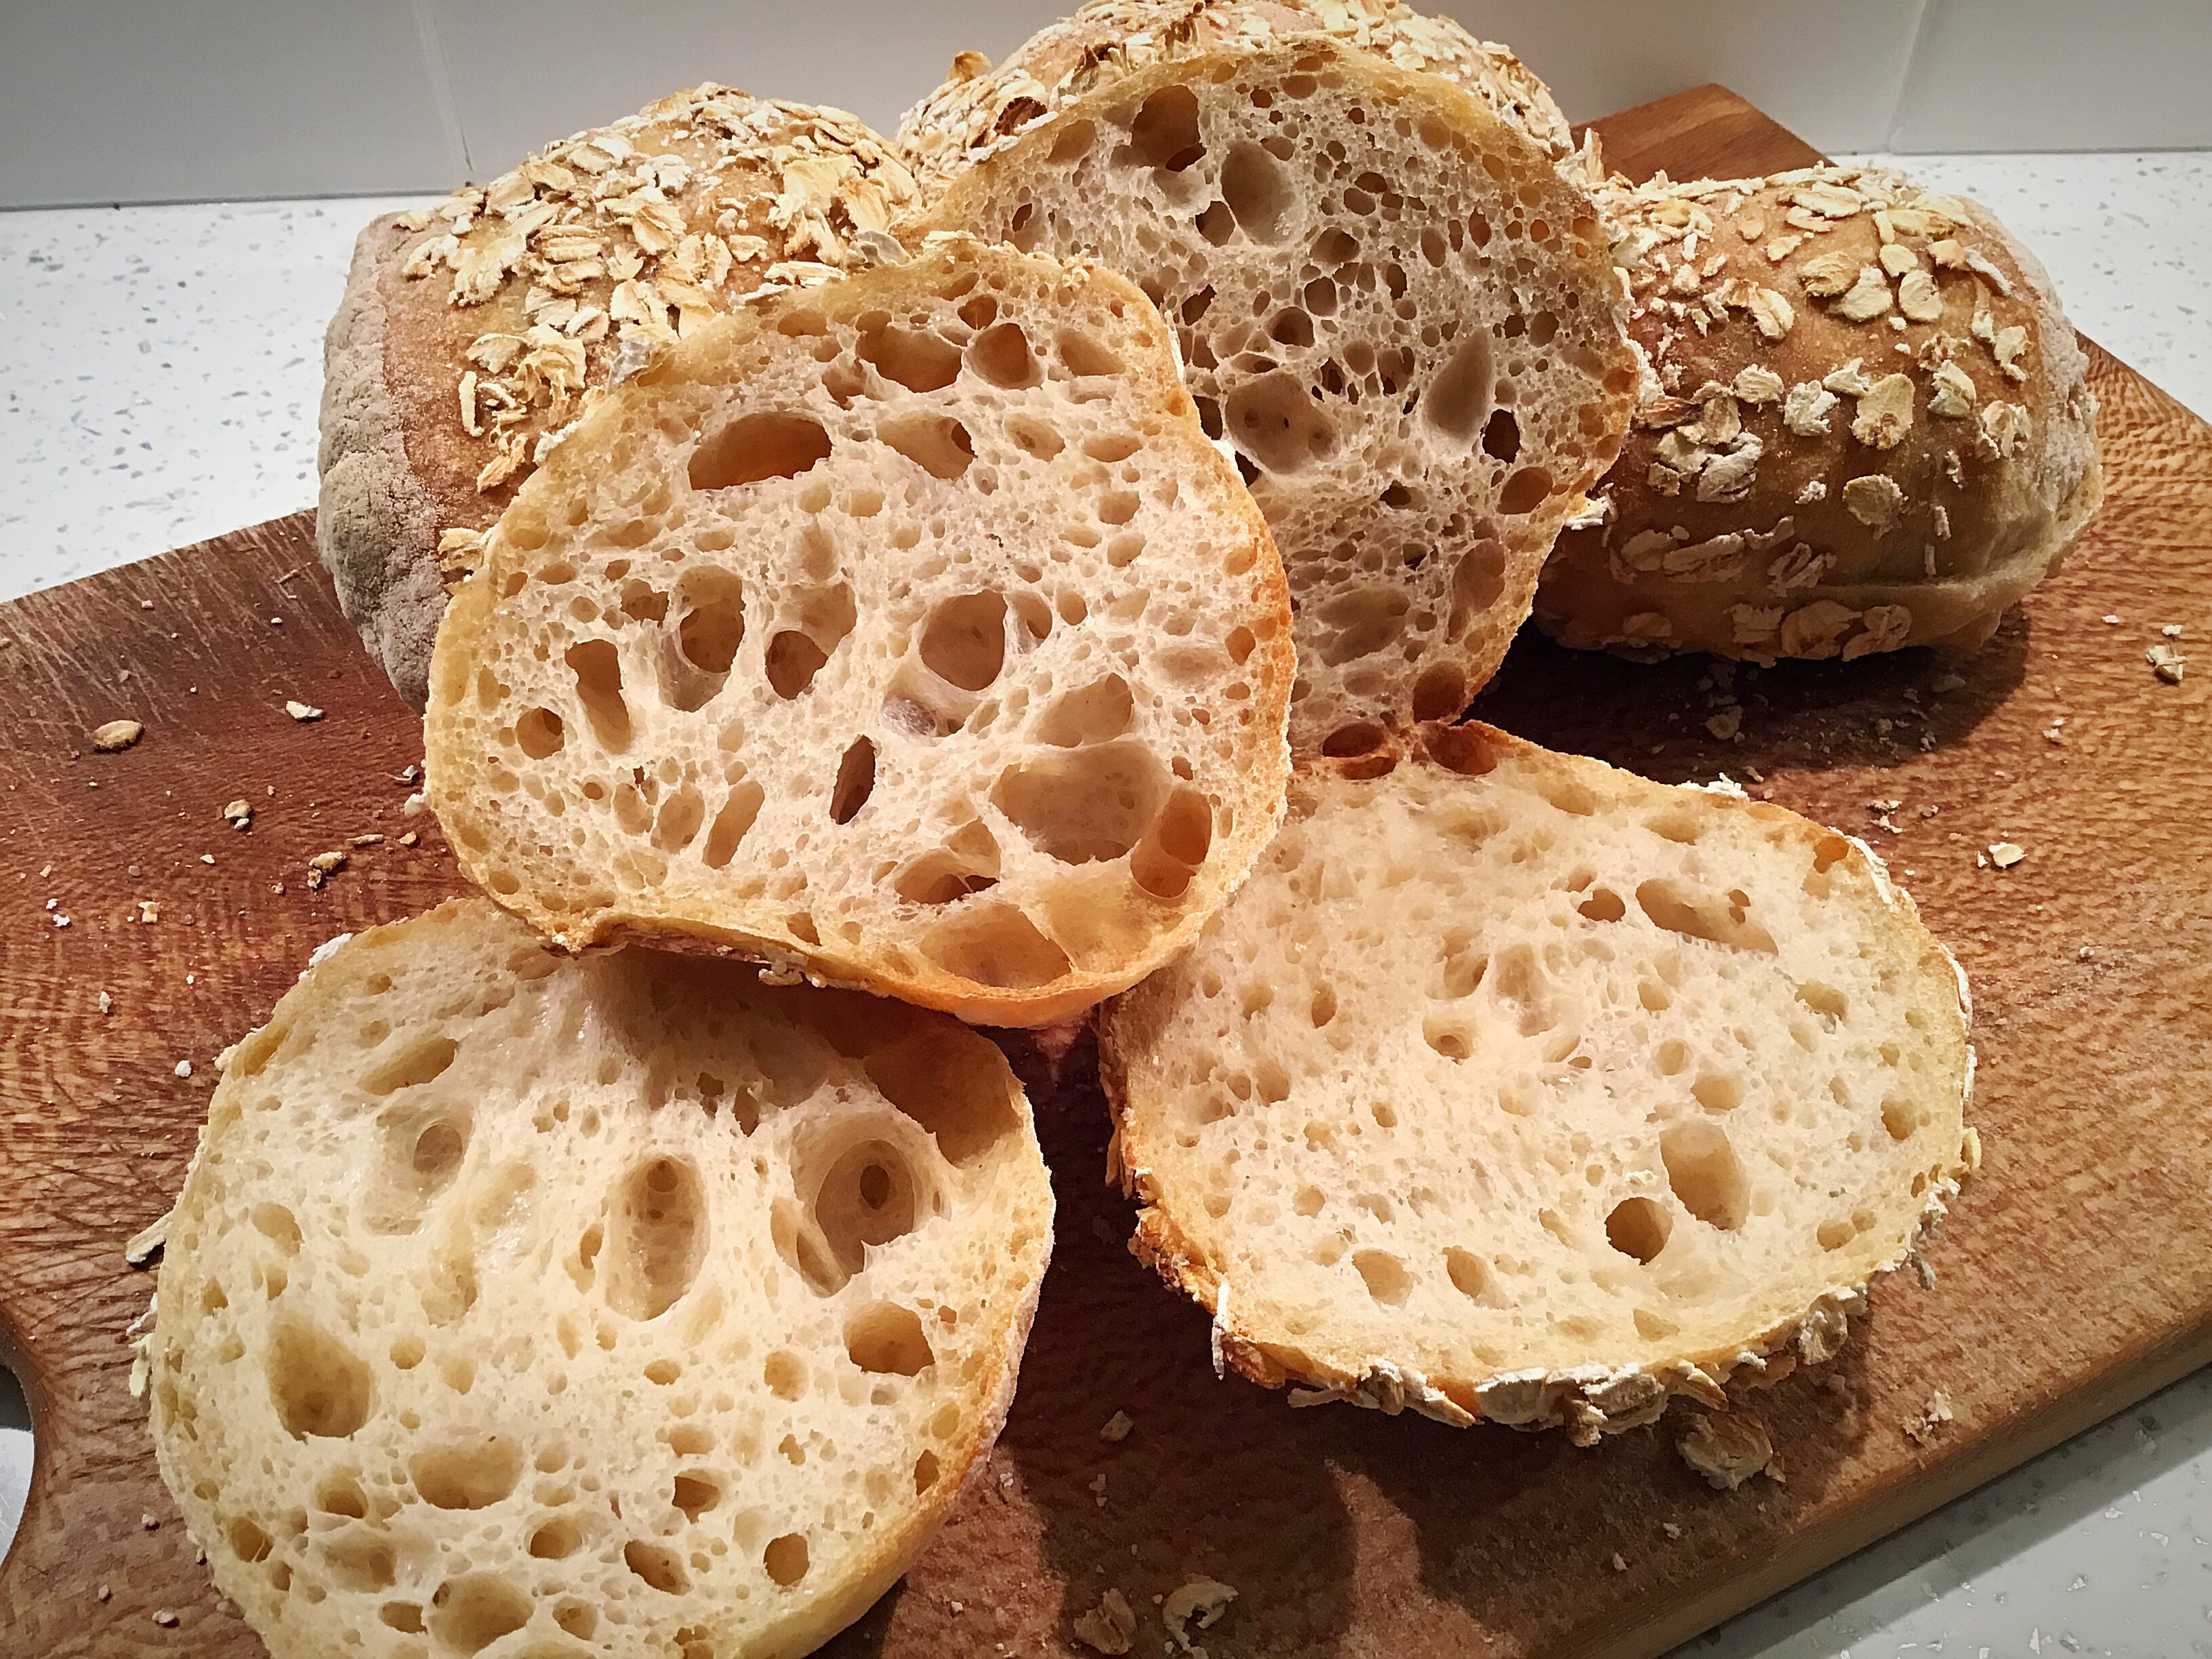 A close up of some bread on a cutting board